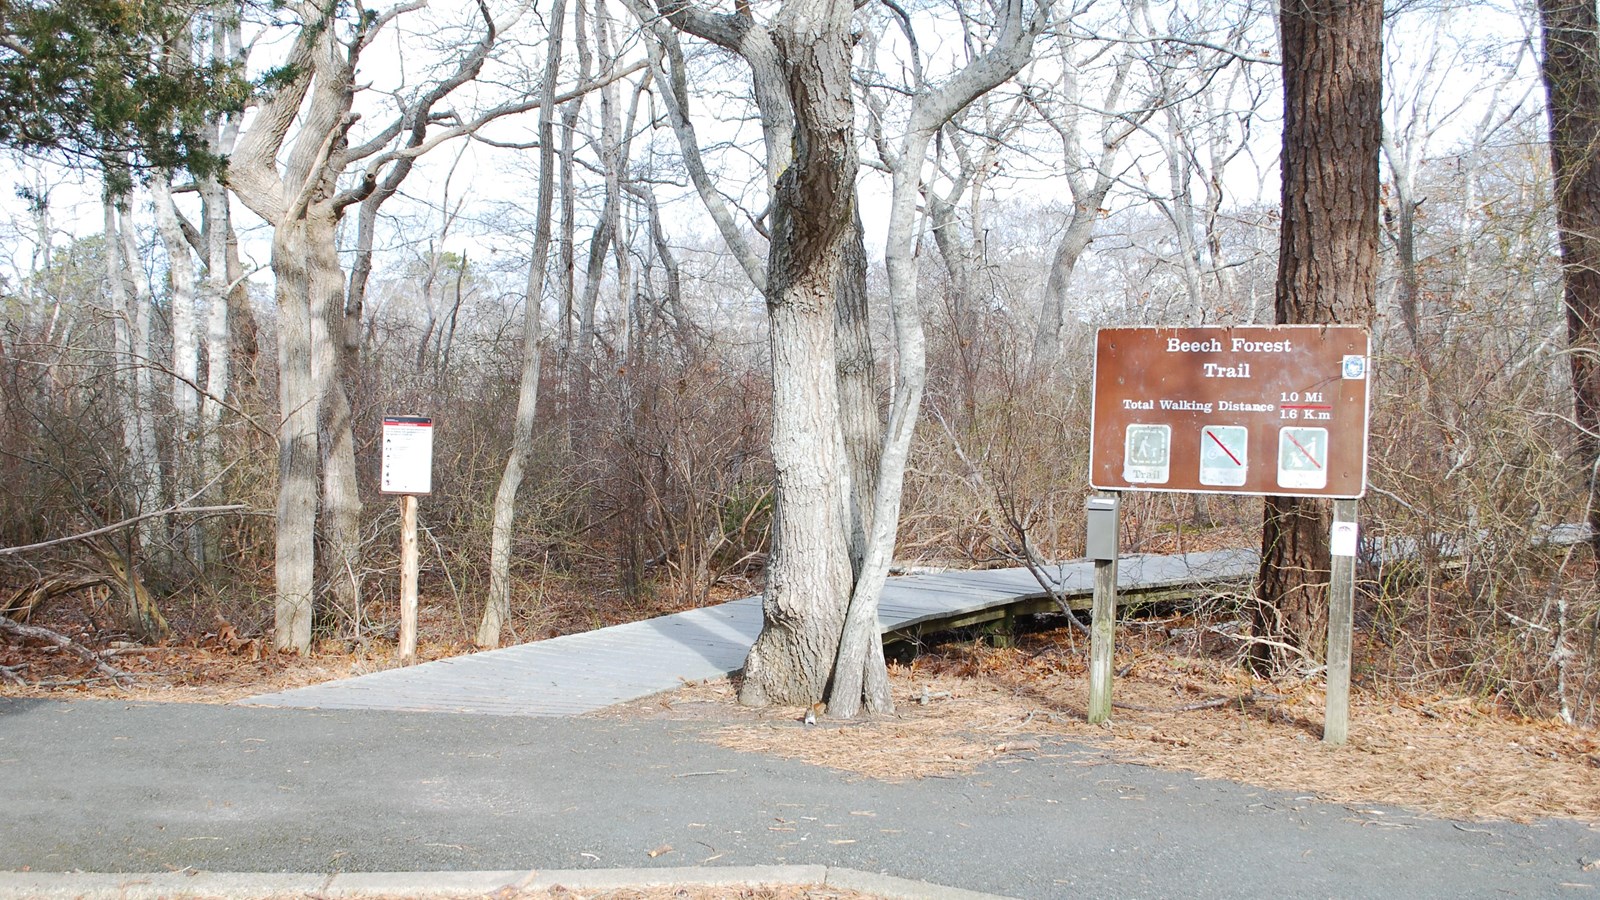 Entrance to the Beech Forest trail. Boardwalk enters the forest. Brown entrance sign.